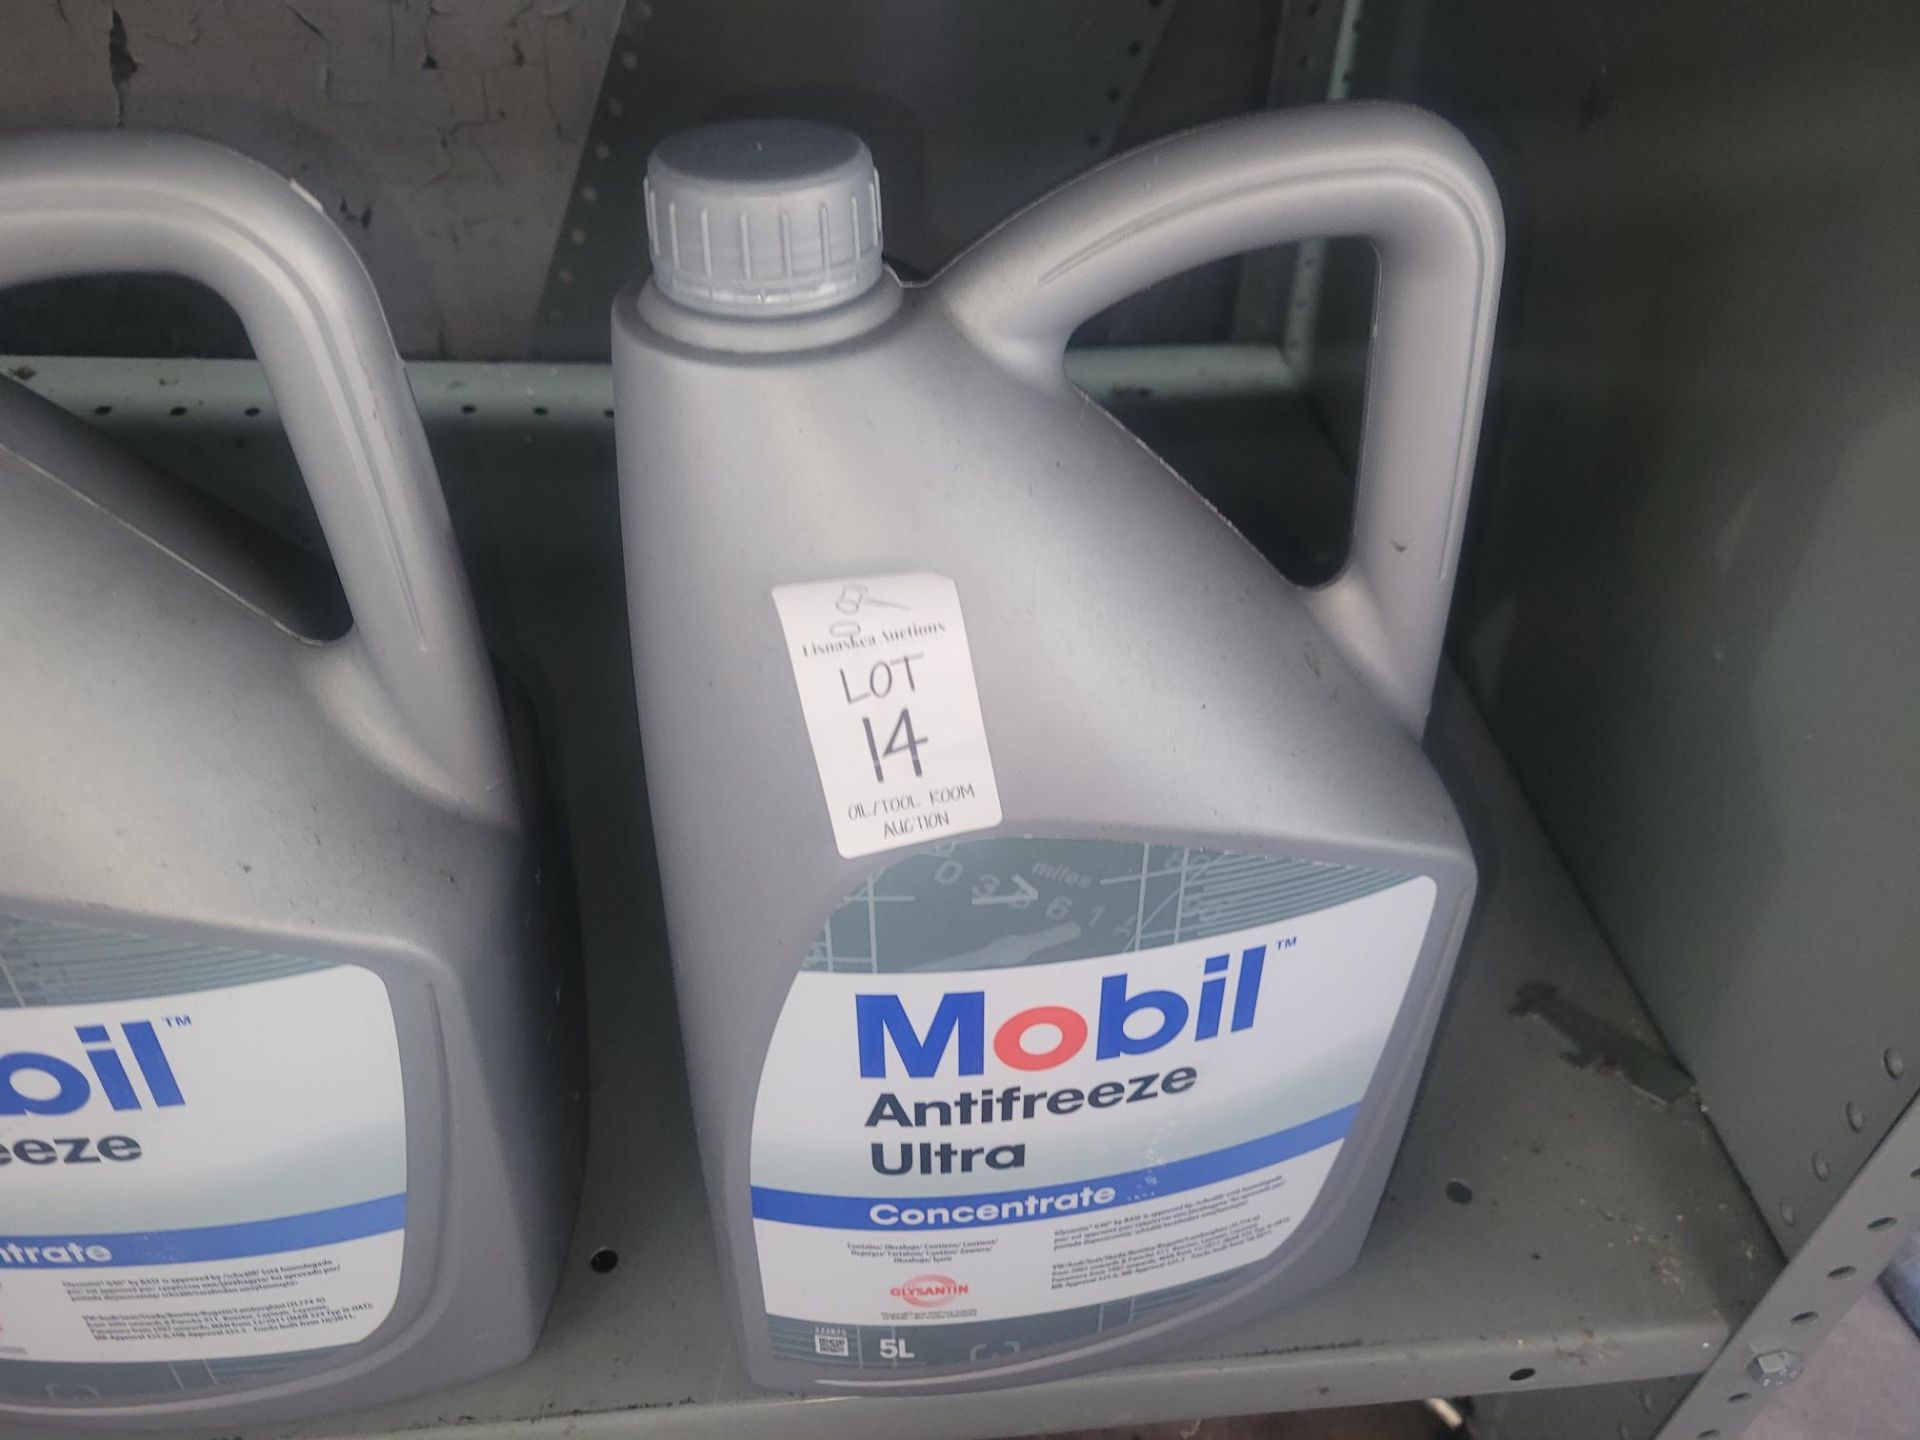 5L MOBIL ANTIFREEZE ULTRA CONCENTRATE